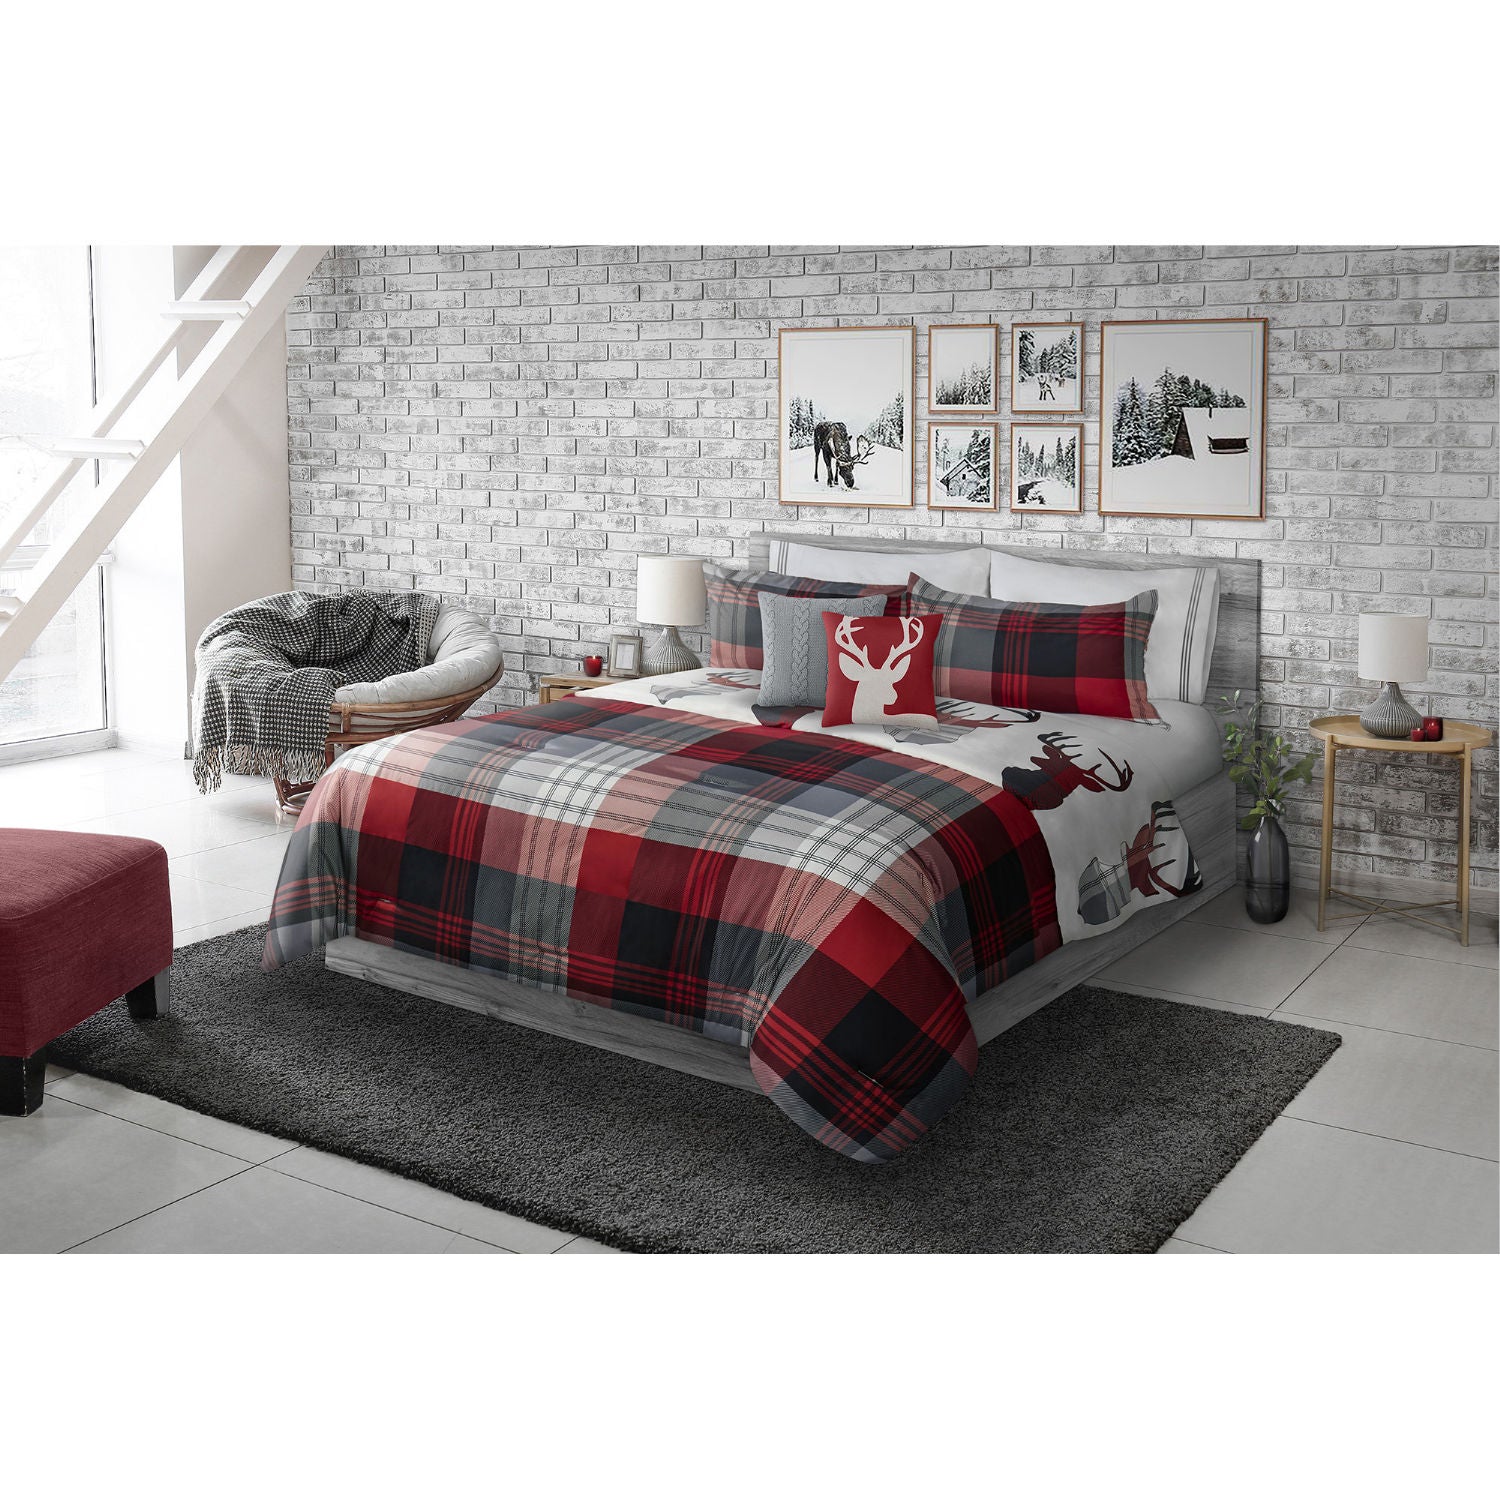 Woven Reversible/Comforter 3 Piece Set King Classic Red Plaid